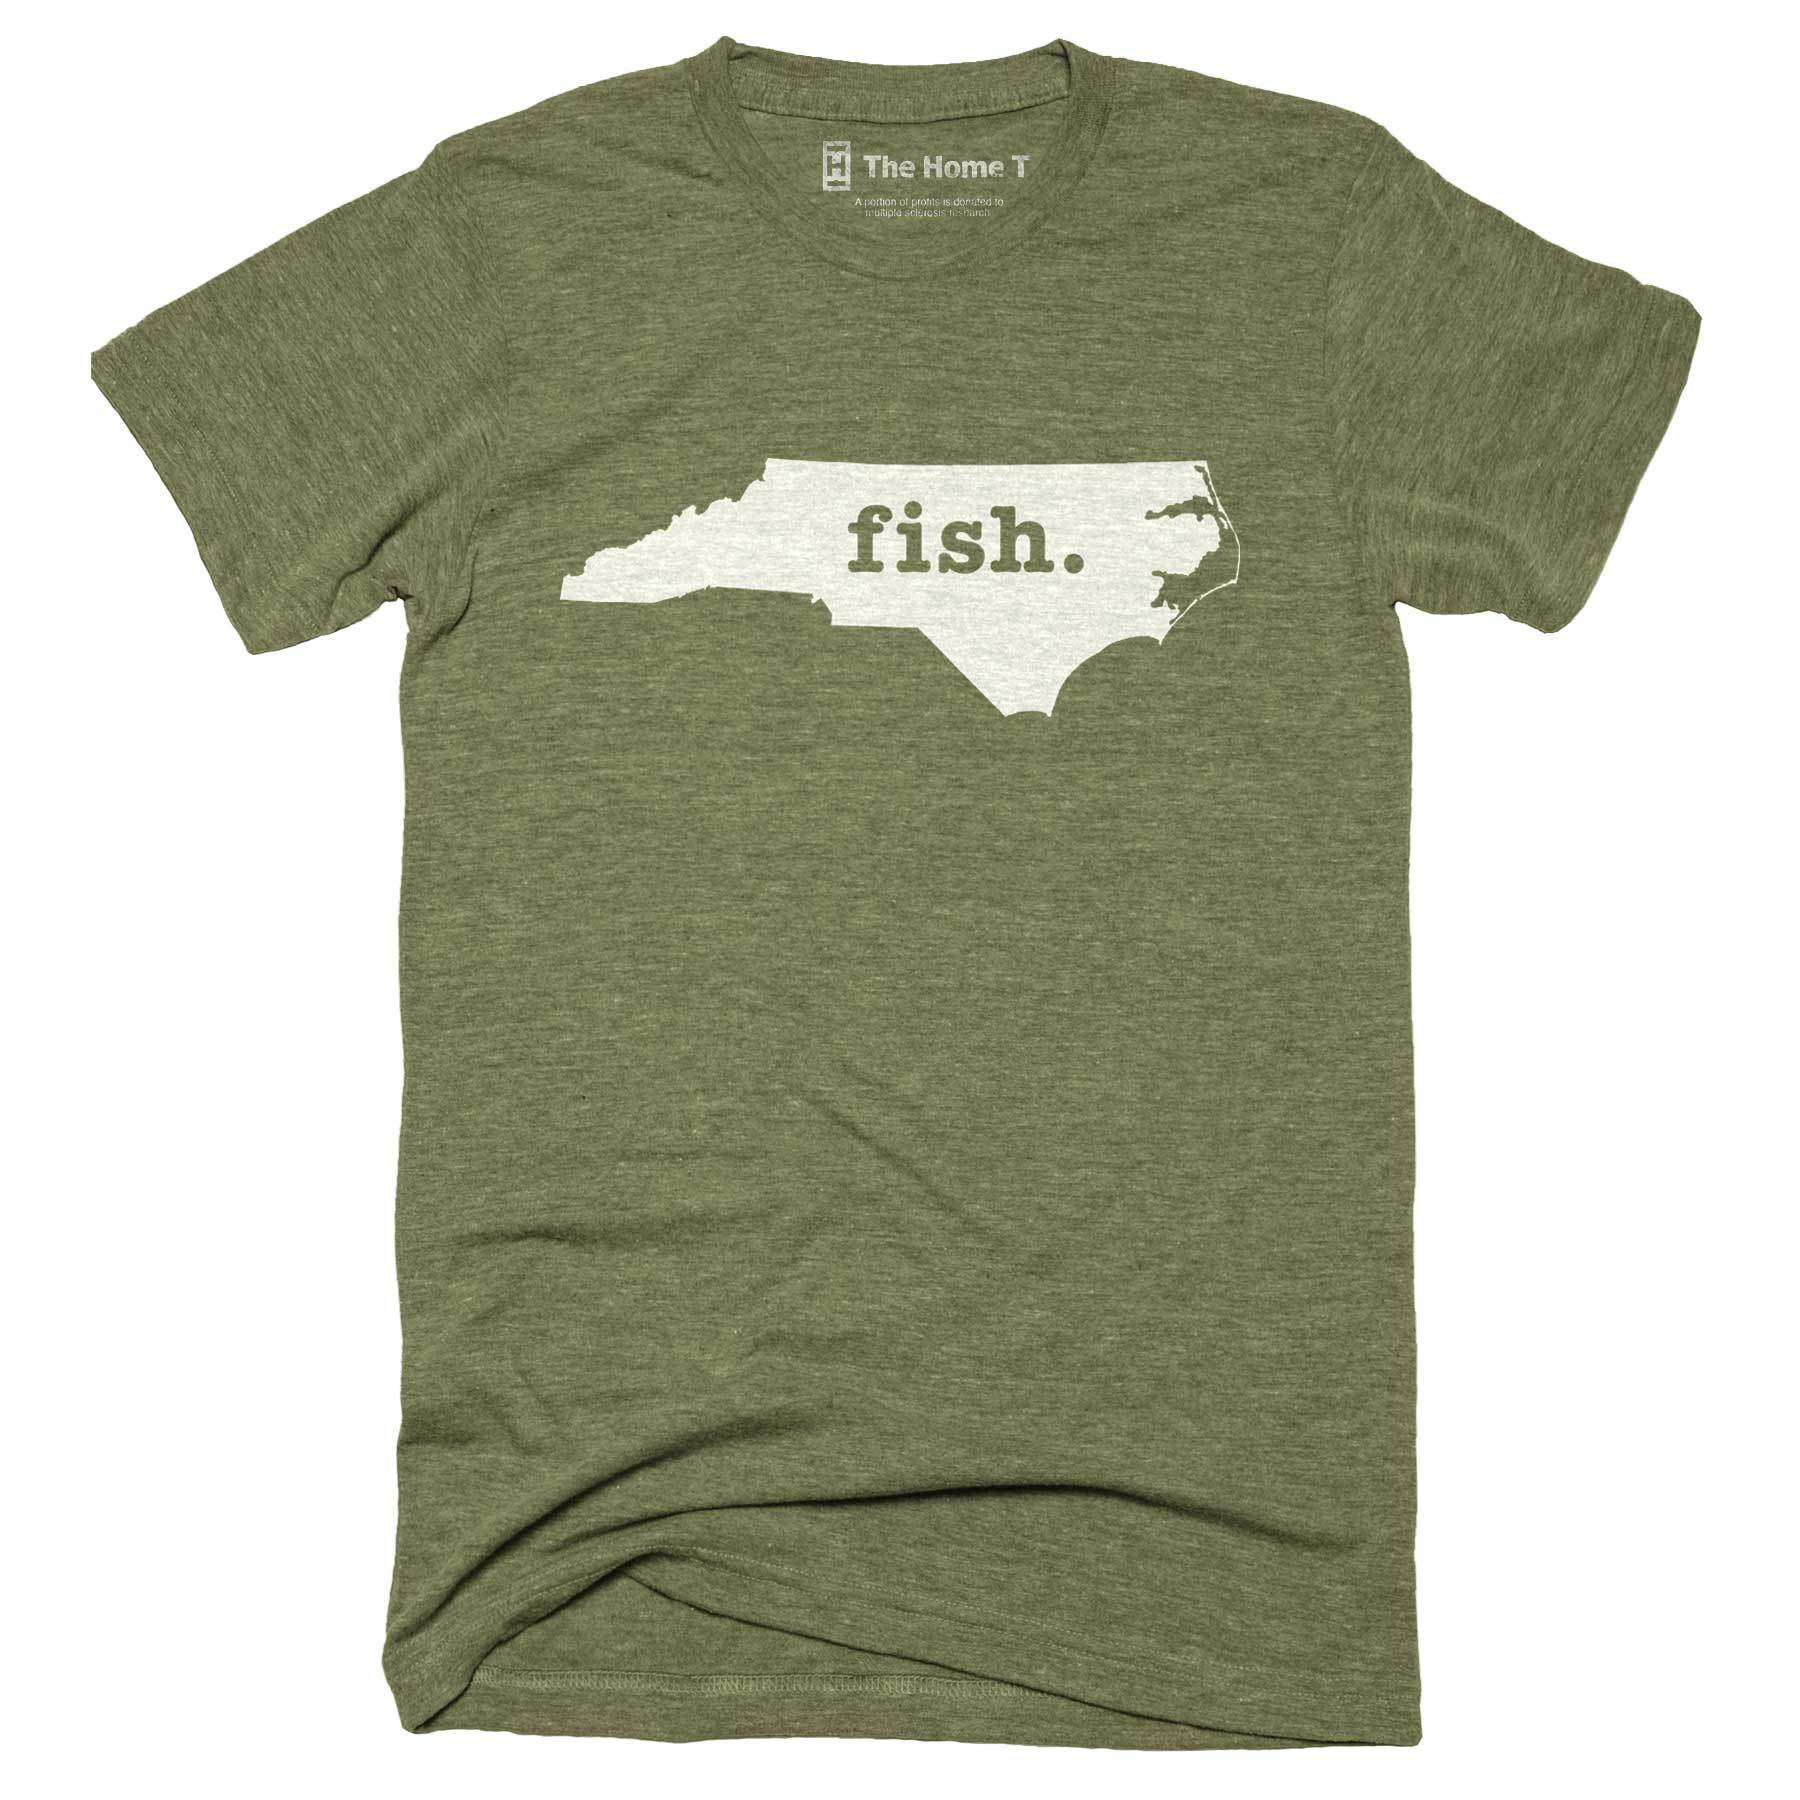 North Carolina Fish Home T-Shirt Outdoor Collection The Home T XS Army Green